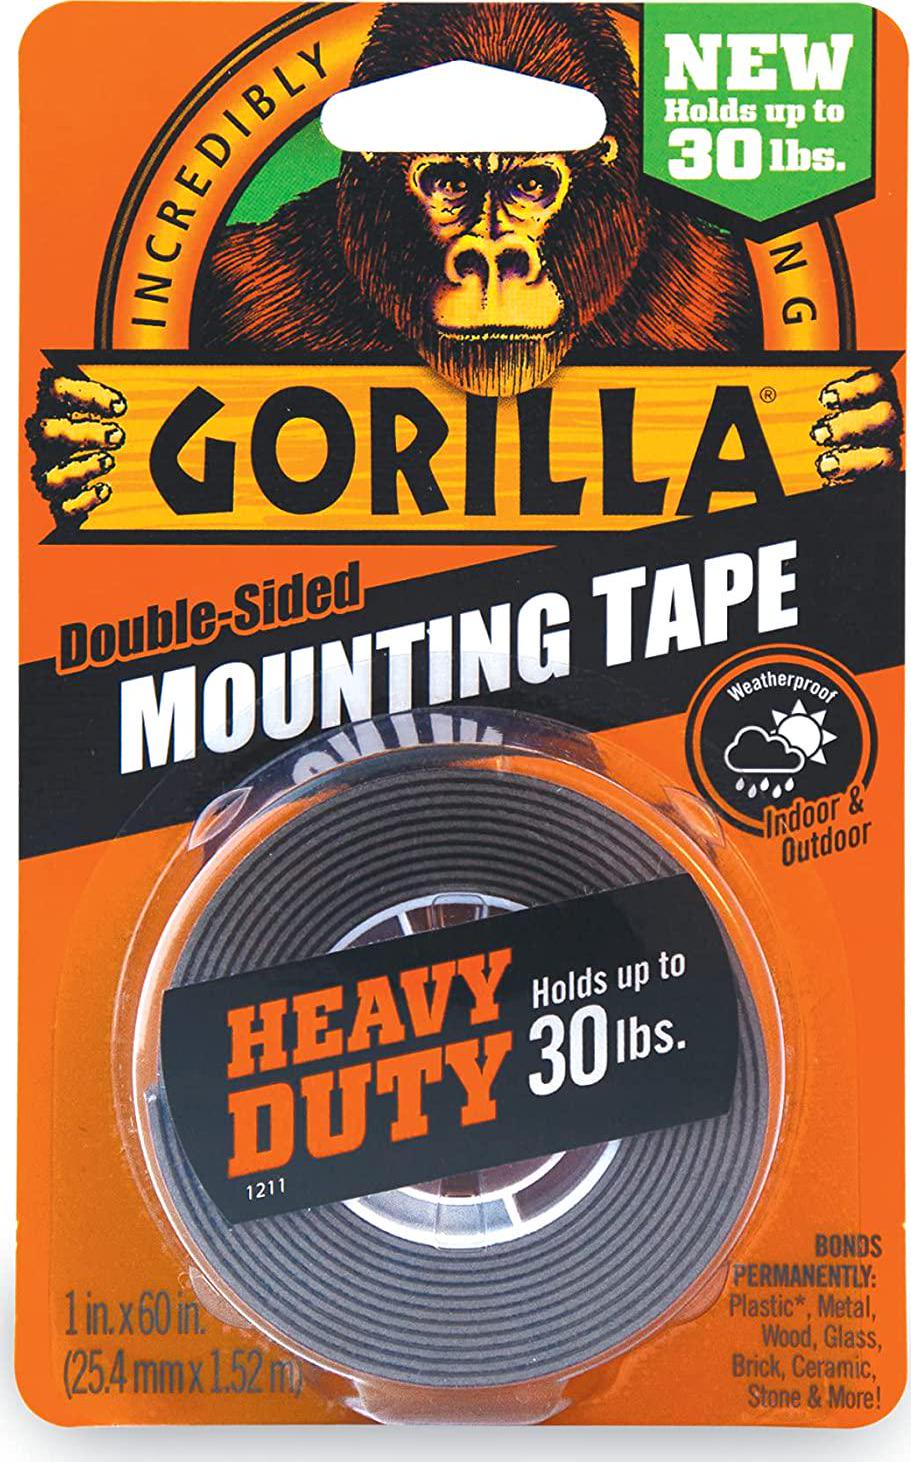 Gorilla, Gorilla Heavy Duty Double Sided Mounting Tape, Hanging, Instant 13.6kg Strong Hold, Permanent Bond, Weatherproof, 25.4mm x 1.52m, Black, (Pack of 1), GG41027